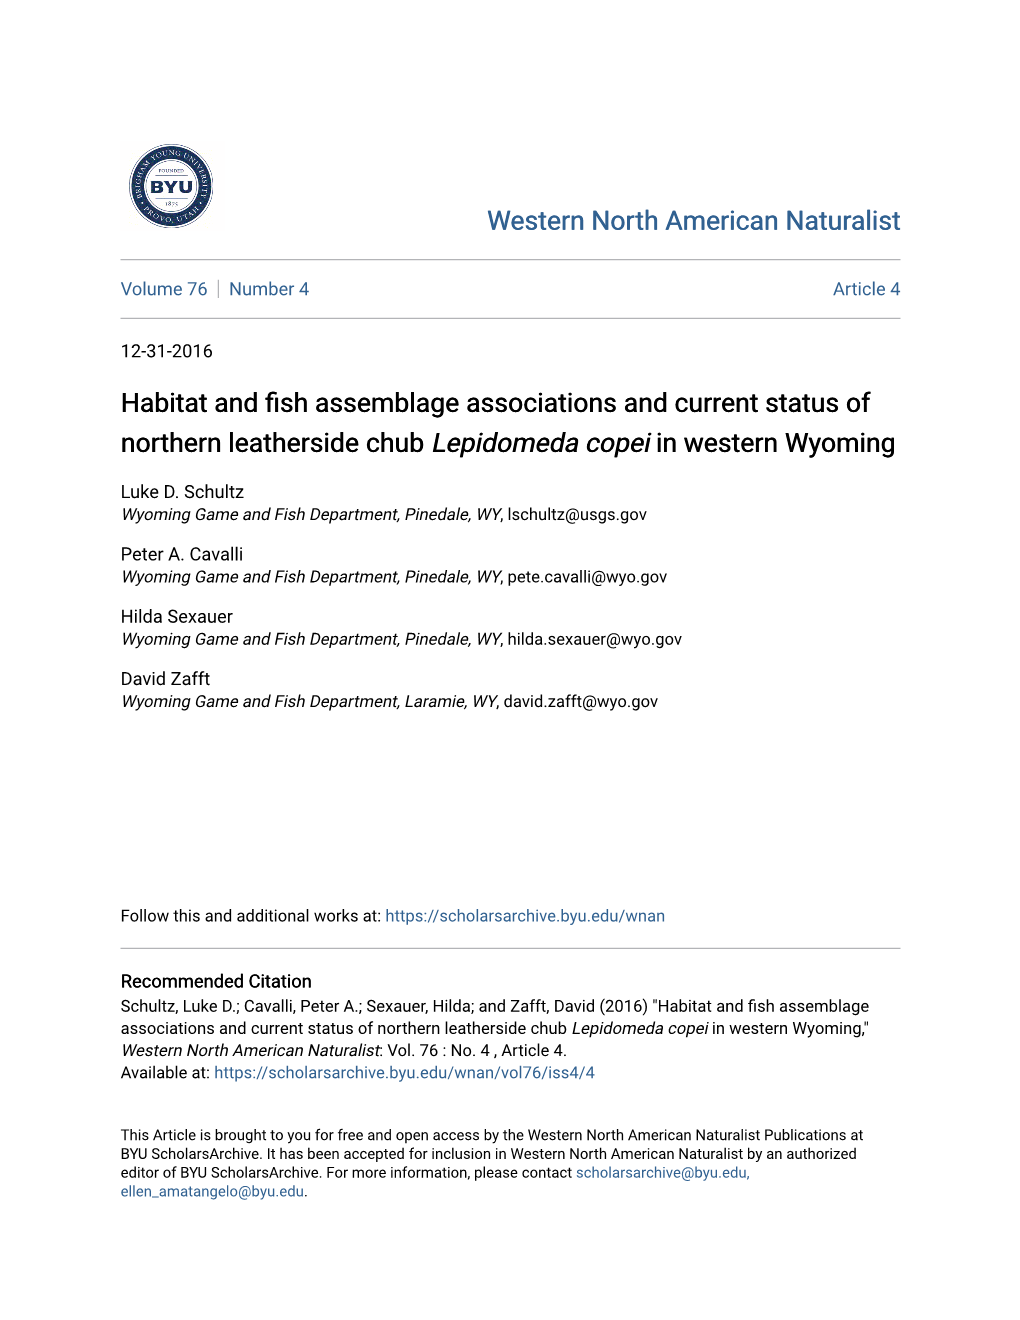 Habitat and Fish Assemblage Associations and Current Status of Northern Leatherside Chub Lepidomeda Copei in Western Wyoming